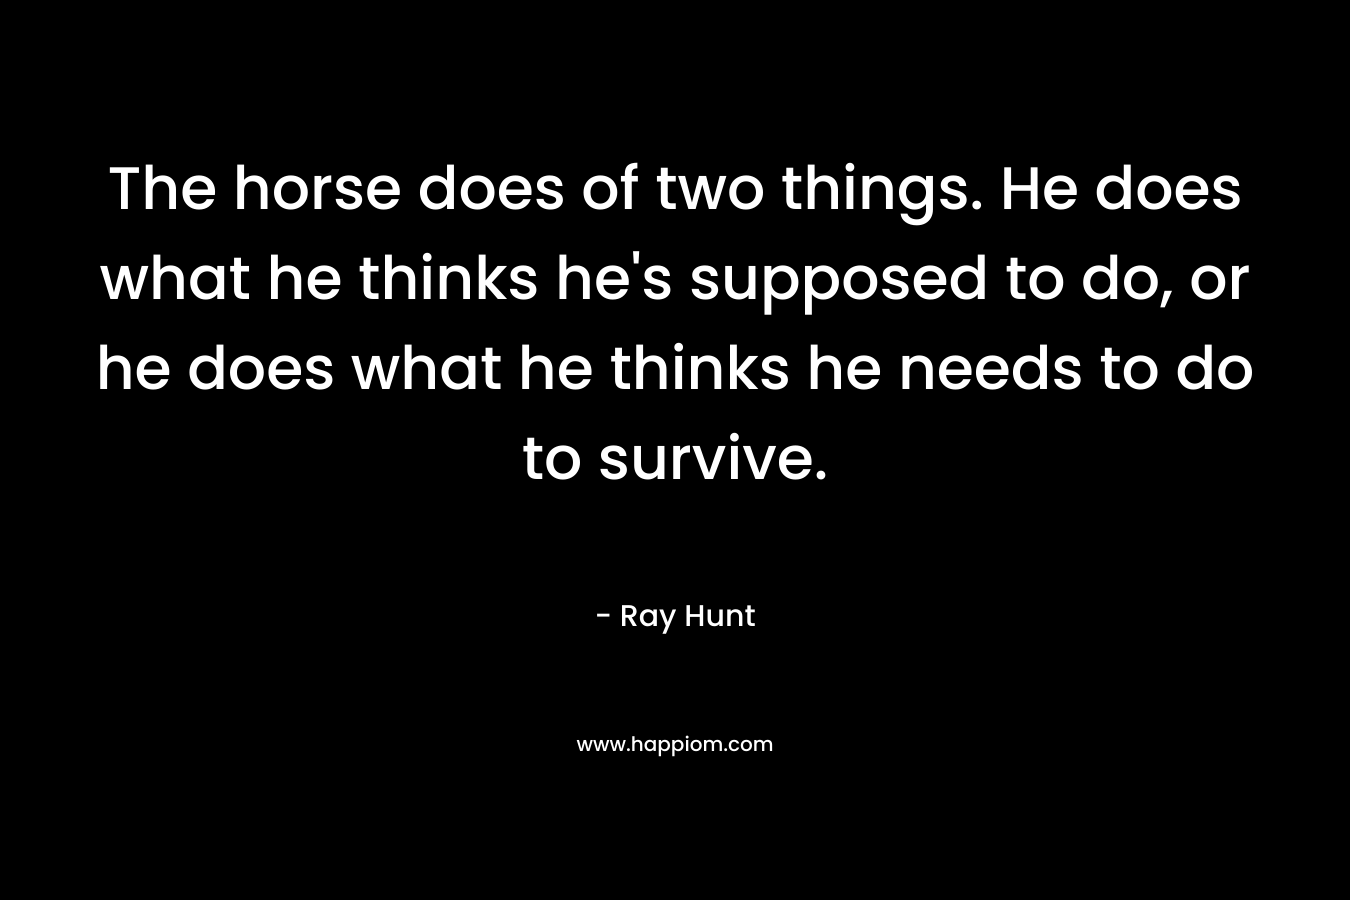 The horse does of two things. He does what he thinks he's supposed to do, or he does what he thinks he needs to do to survive.